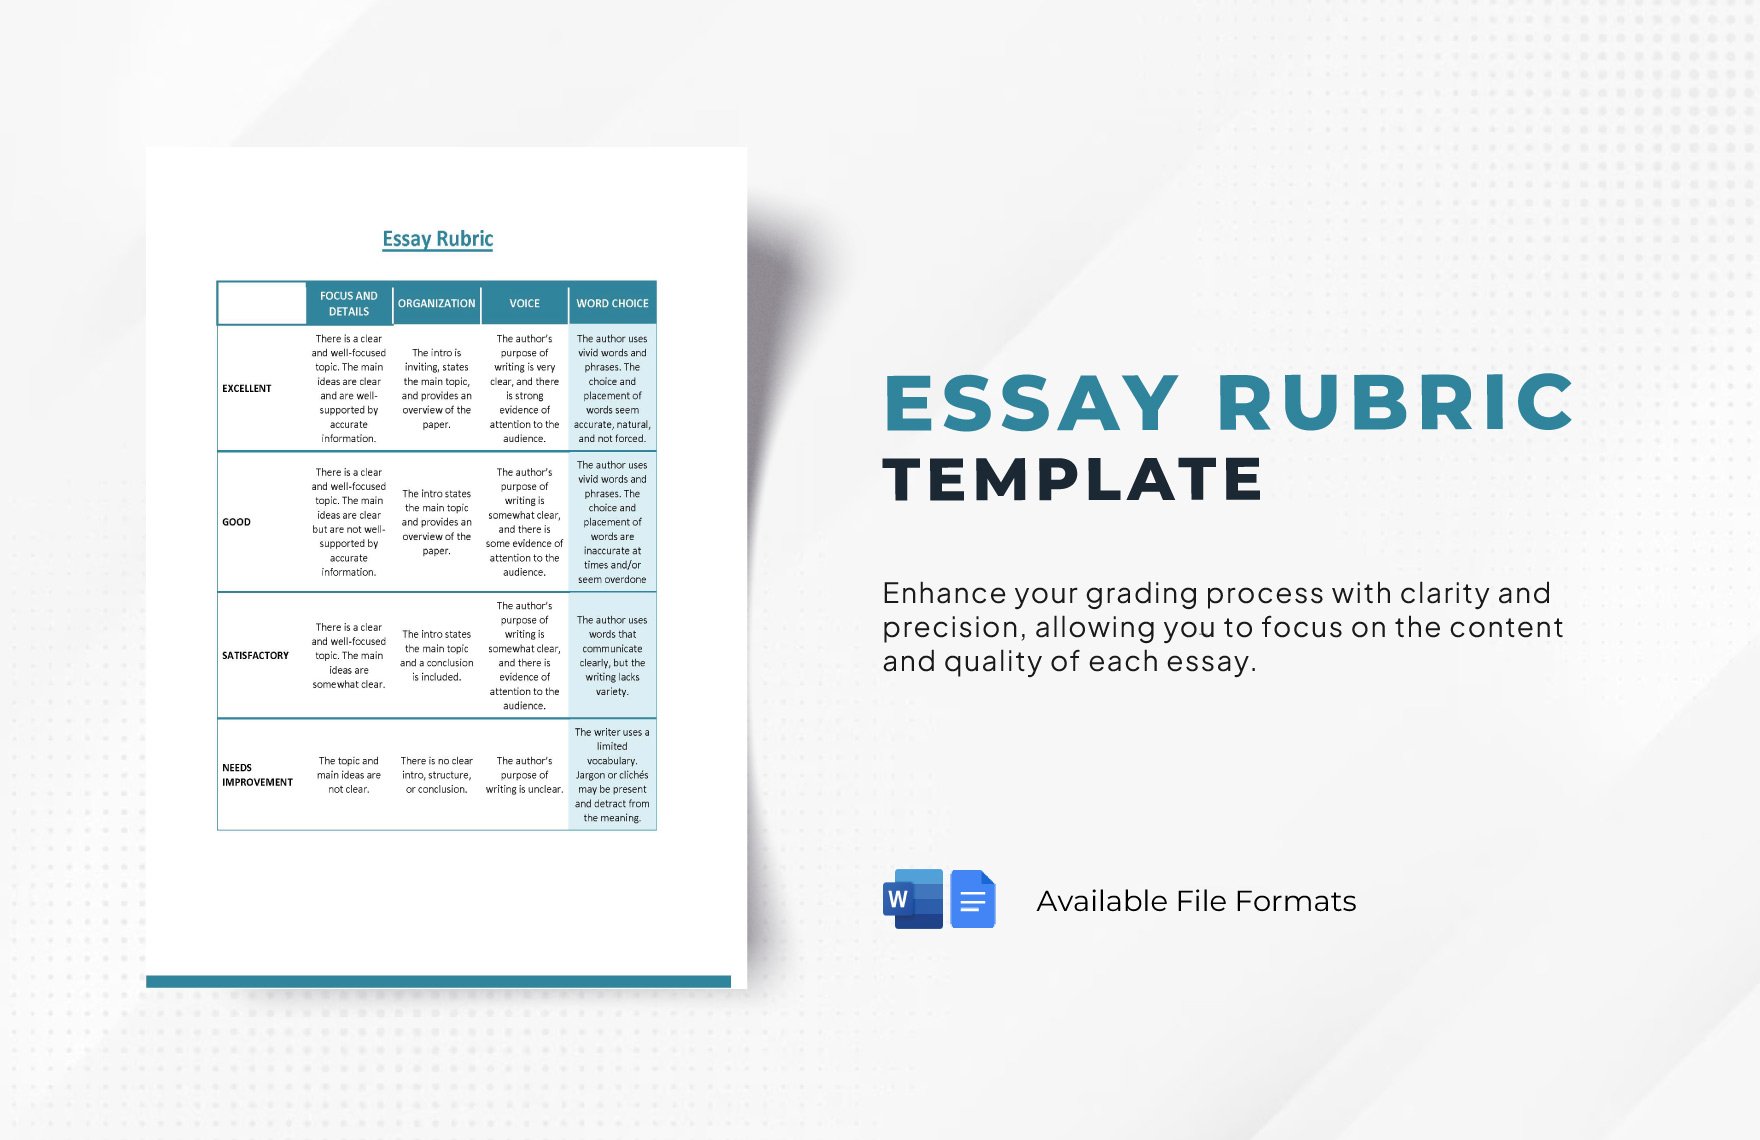 Free Essay Rubric Template in Word, Google Docs